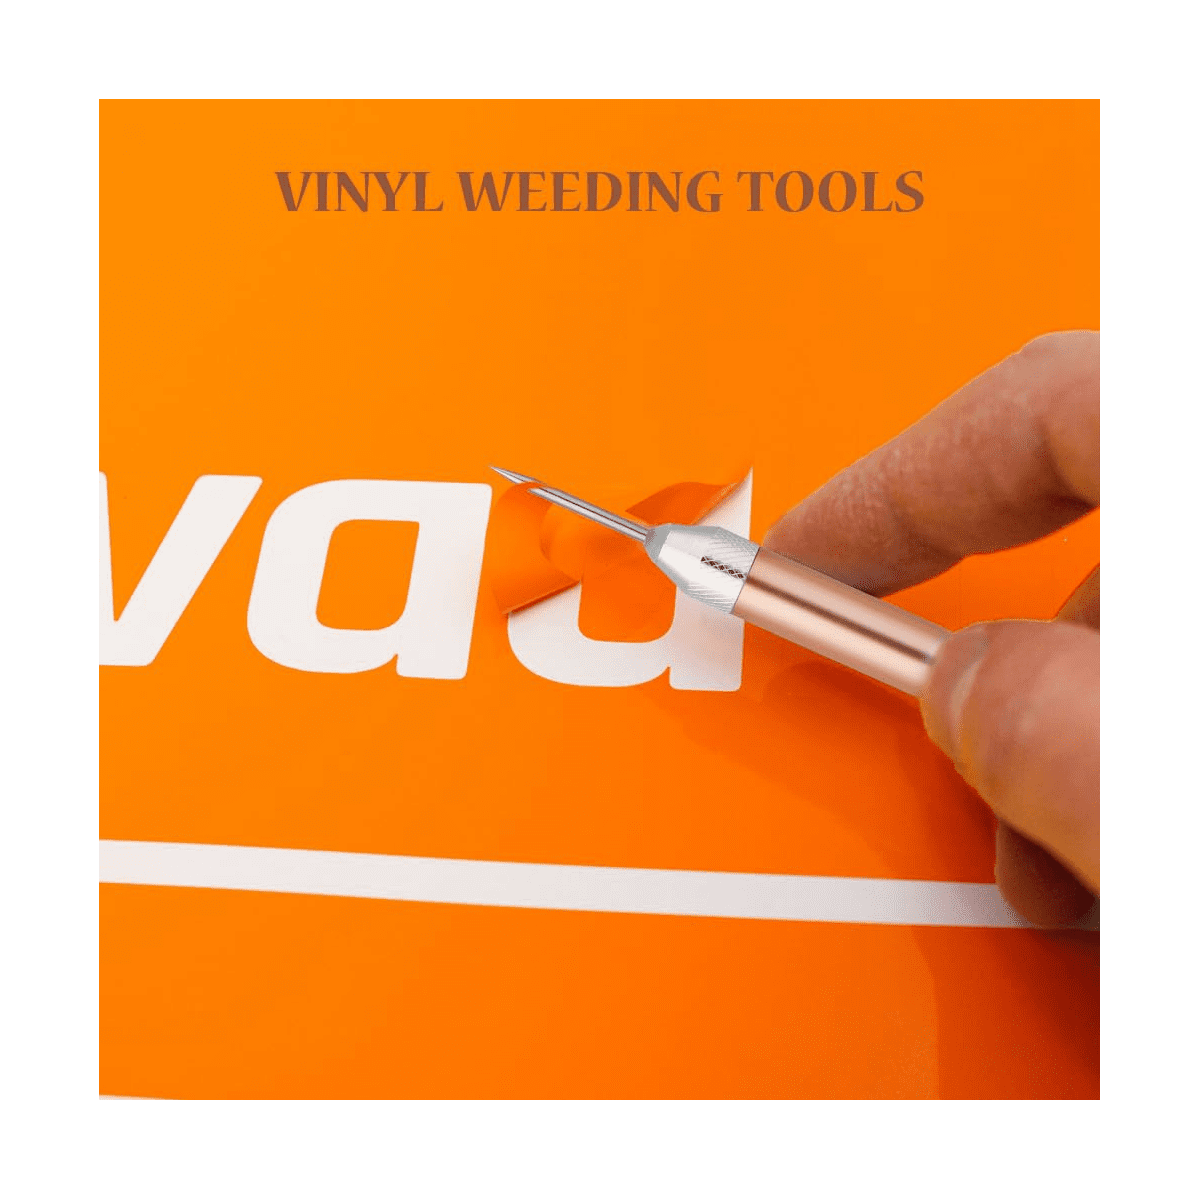 2pcs LED Weeding Tools for Vinyl: Lighted Weeding Pen with Pin & Hook for Removing Tiny Vinyl Paper/Iron Projects Cuts, Men's, Size: One size, Gold